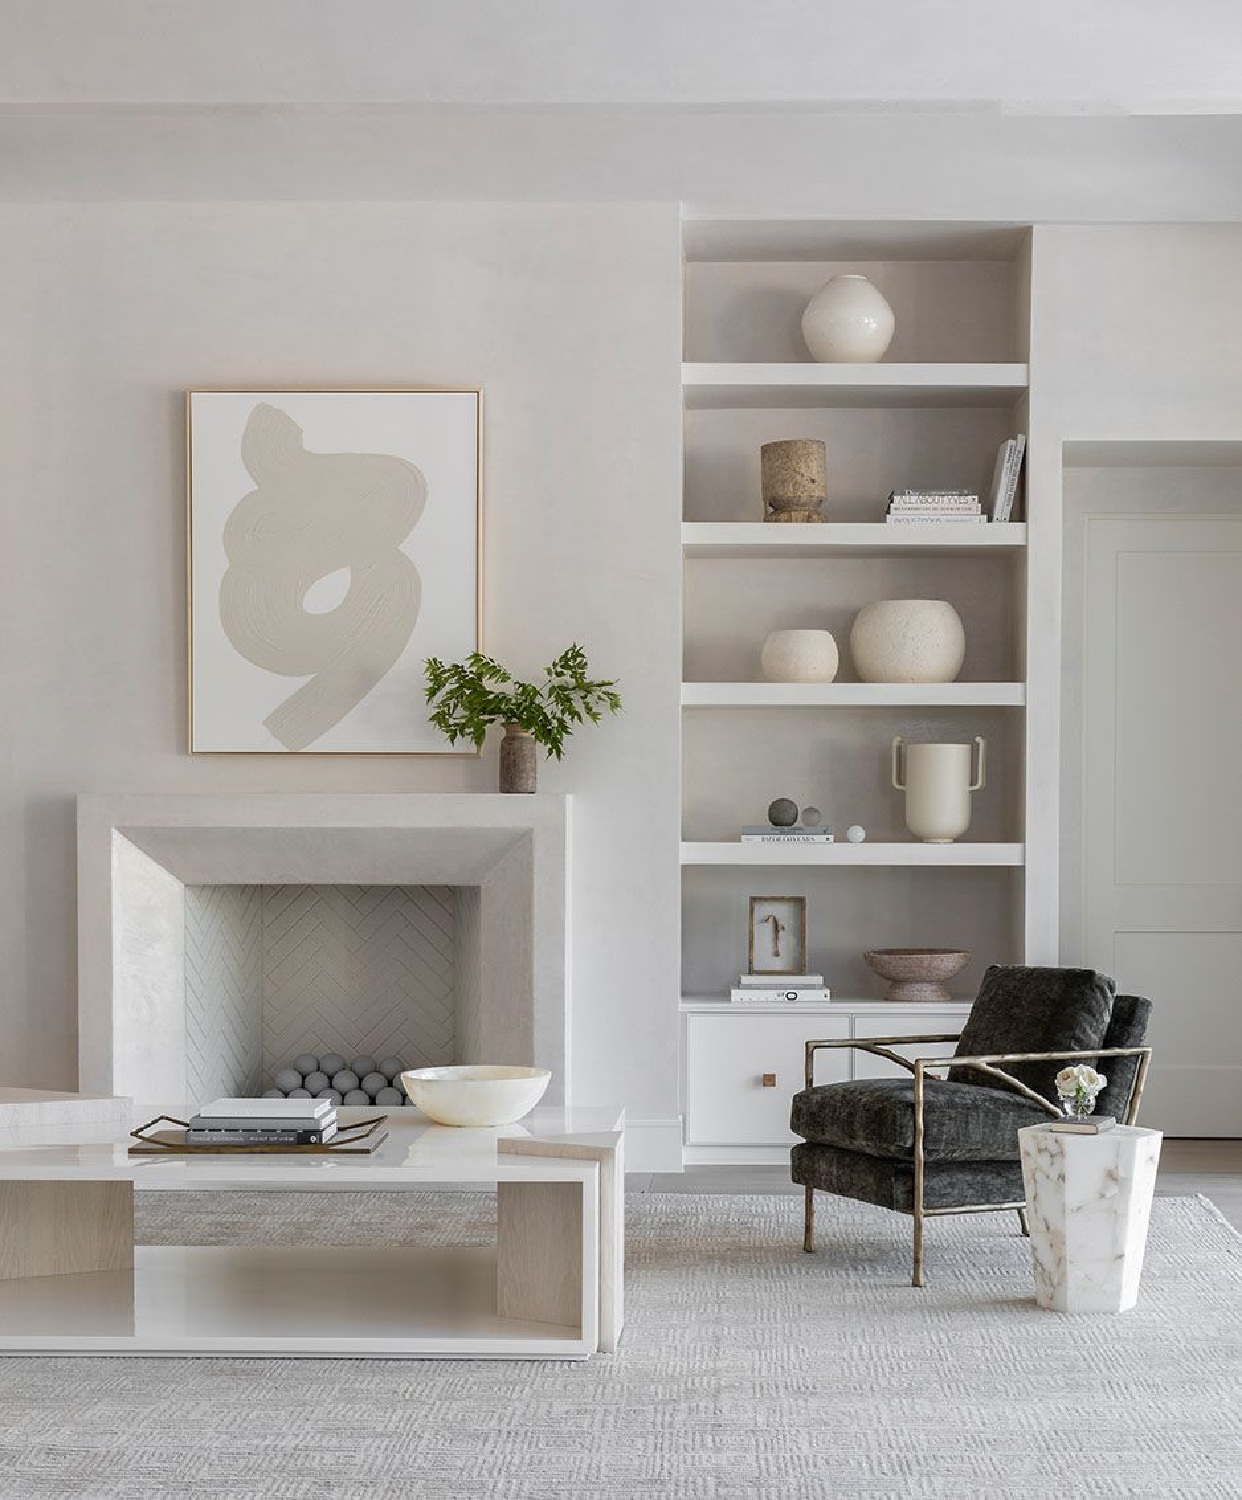 Pale and understated interior in Marie Flanigan's THE BEAUTY OF HOME: Redefining Traditional Interiors (Gibbs Smith, 2020).